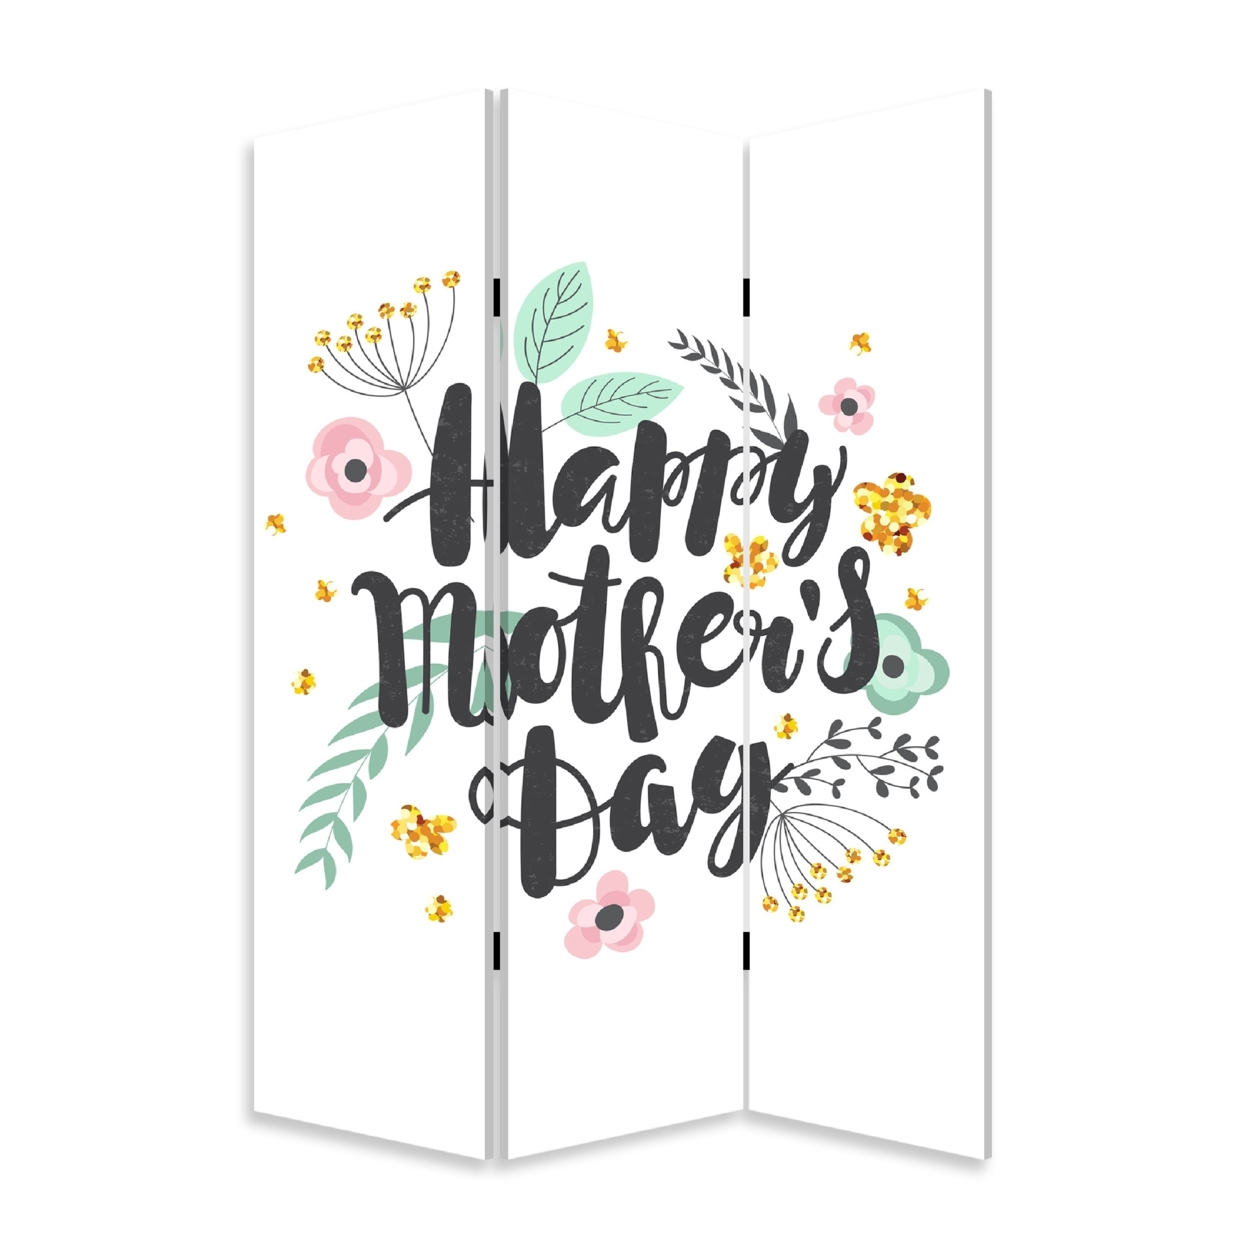 72 Inch 3 Panel Canvas Room Divider, Black Painted Mothers Day, White- Saltoro Sherpi